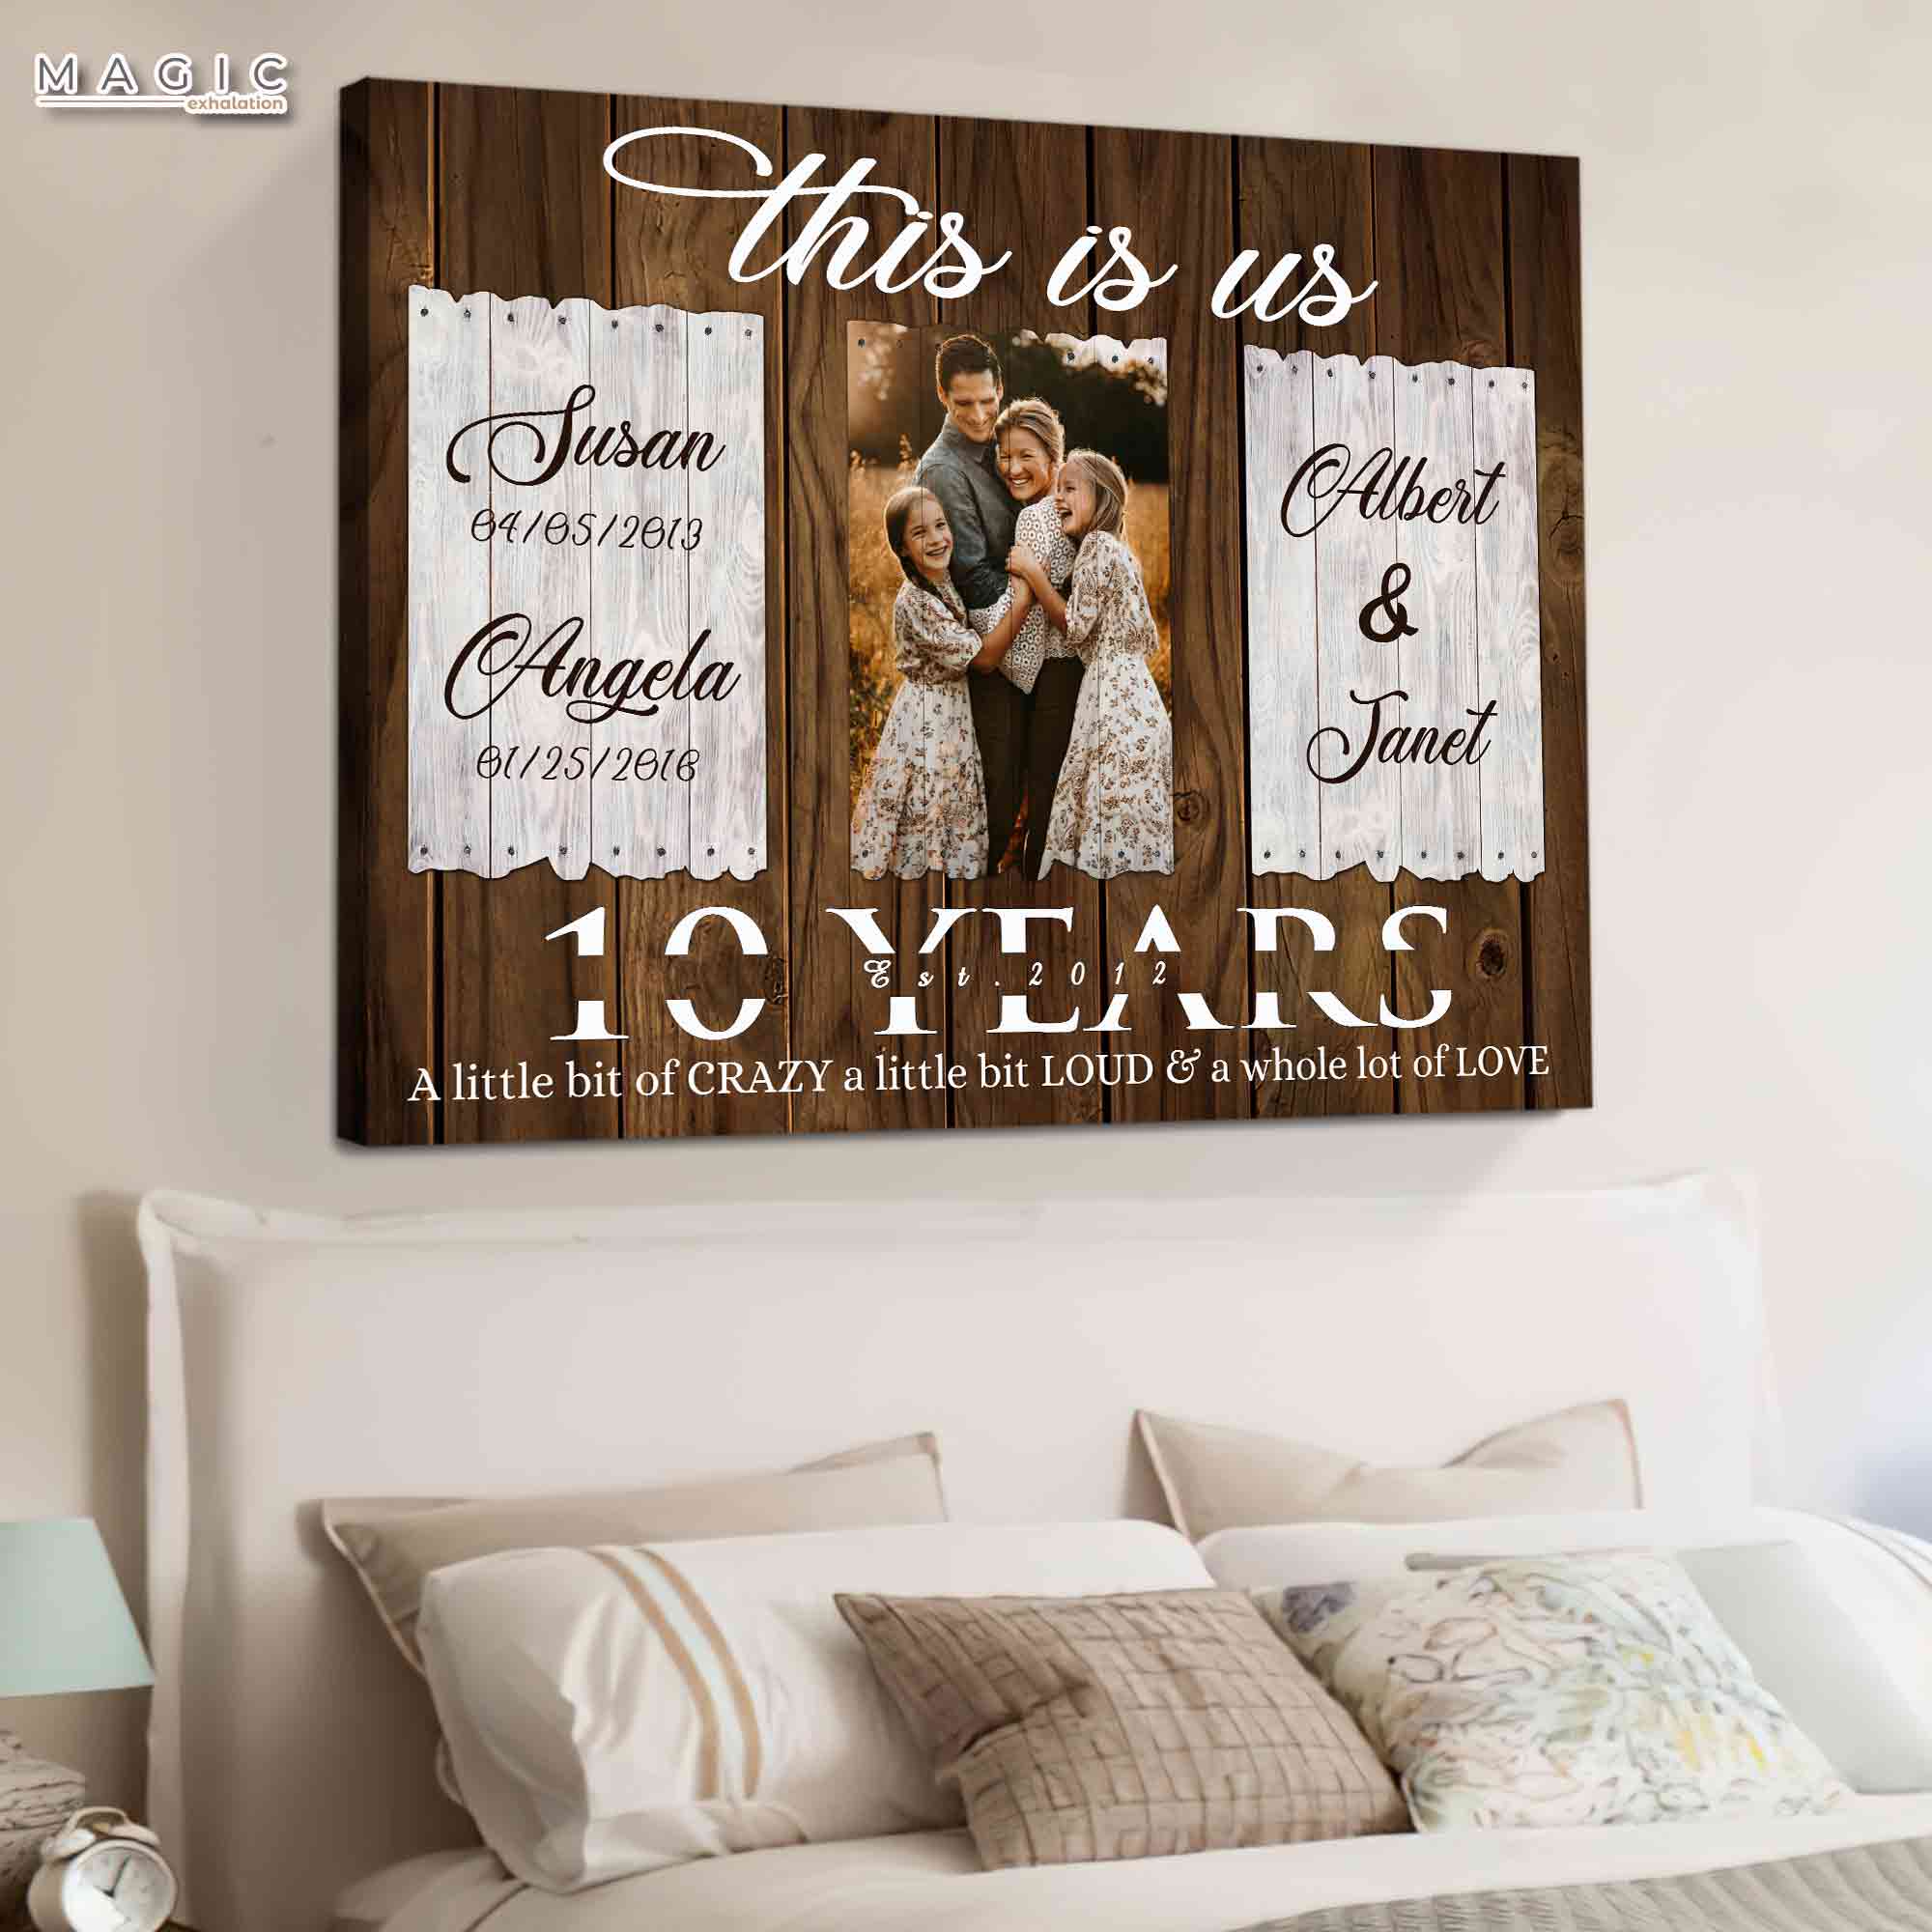 Anniversary gift ideas mom dad personalized plaque mother father